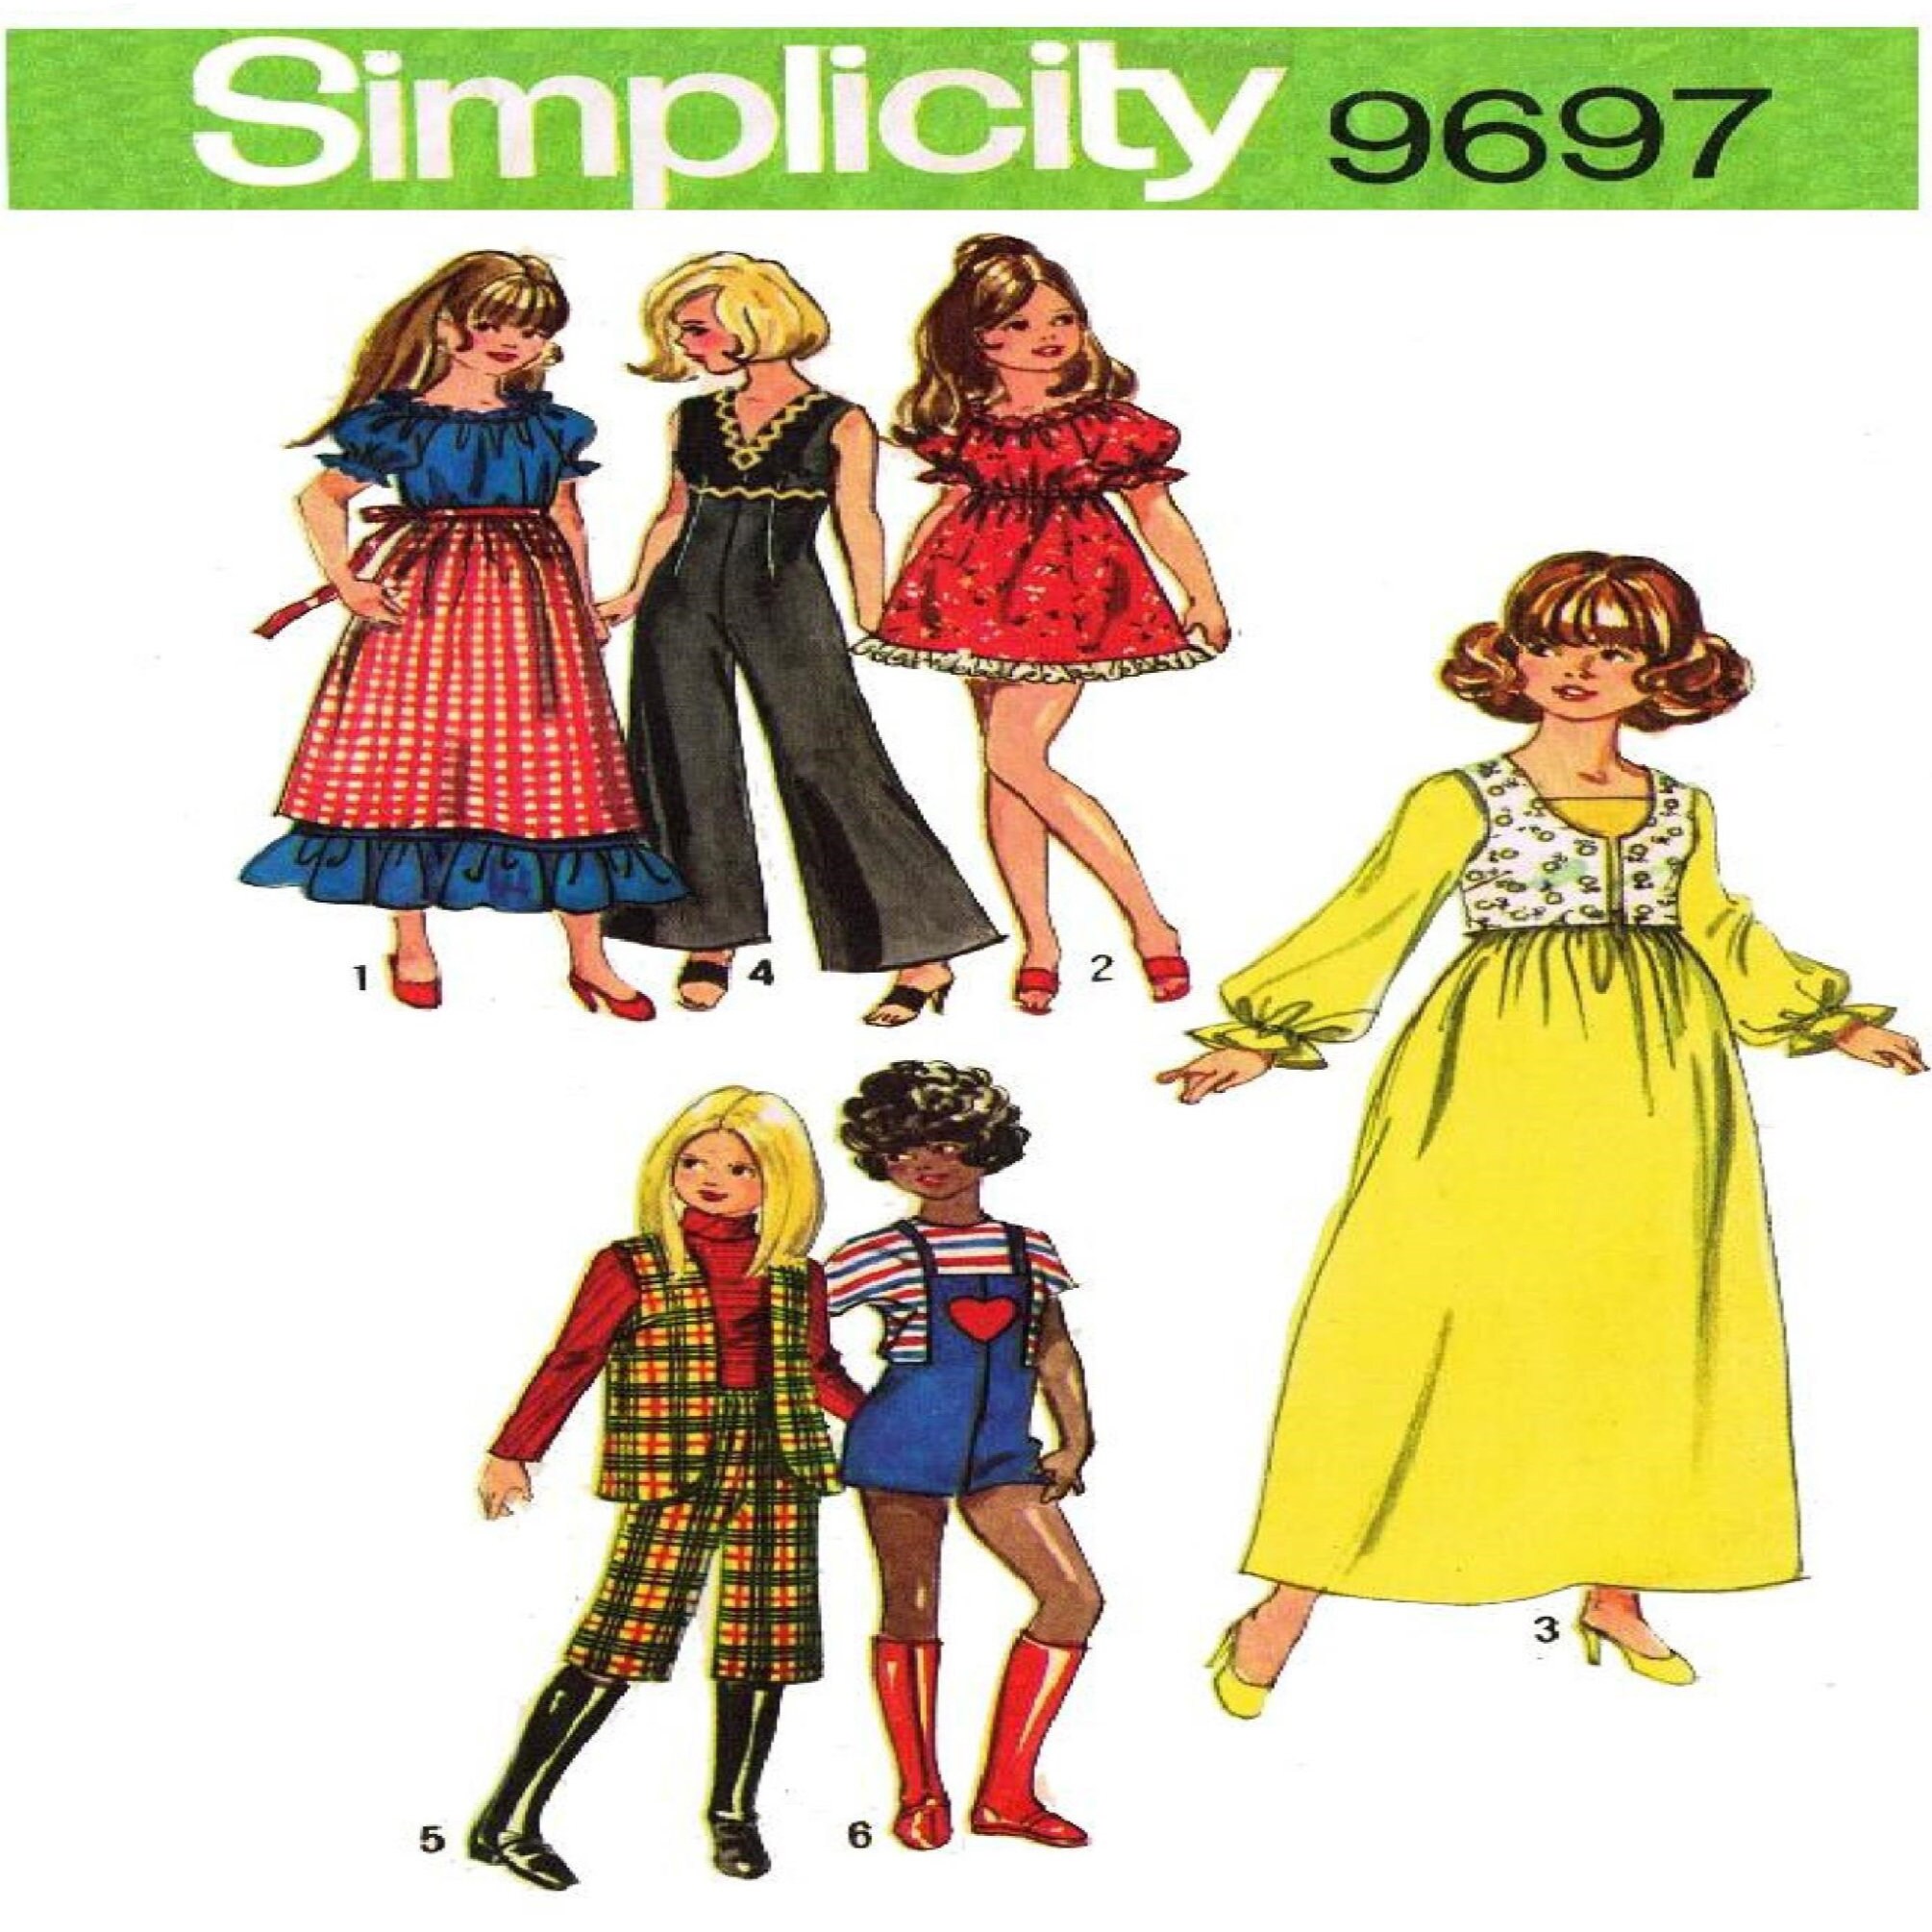 Vintage Simplicity 5673 for 11 1/2 Inch Dolls Such as Barbie Doll